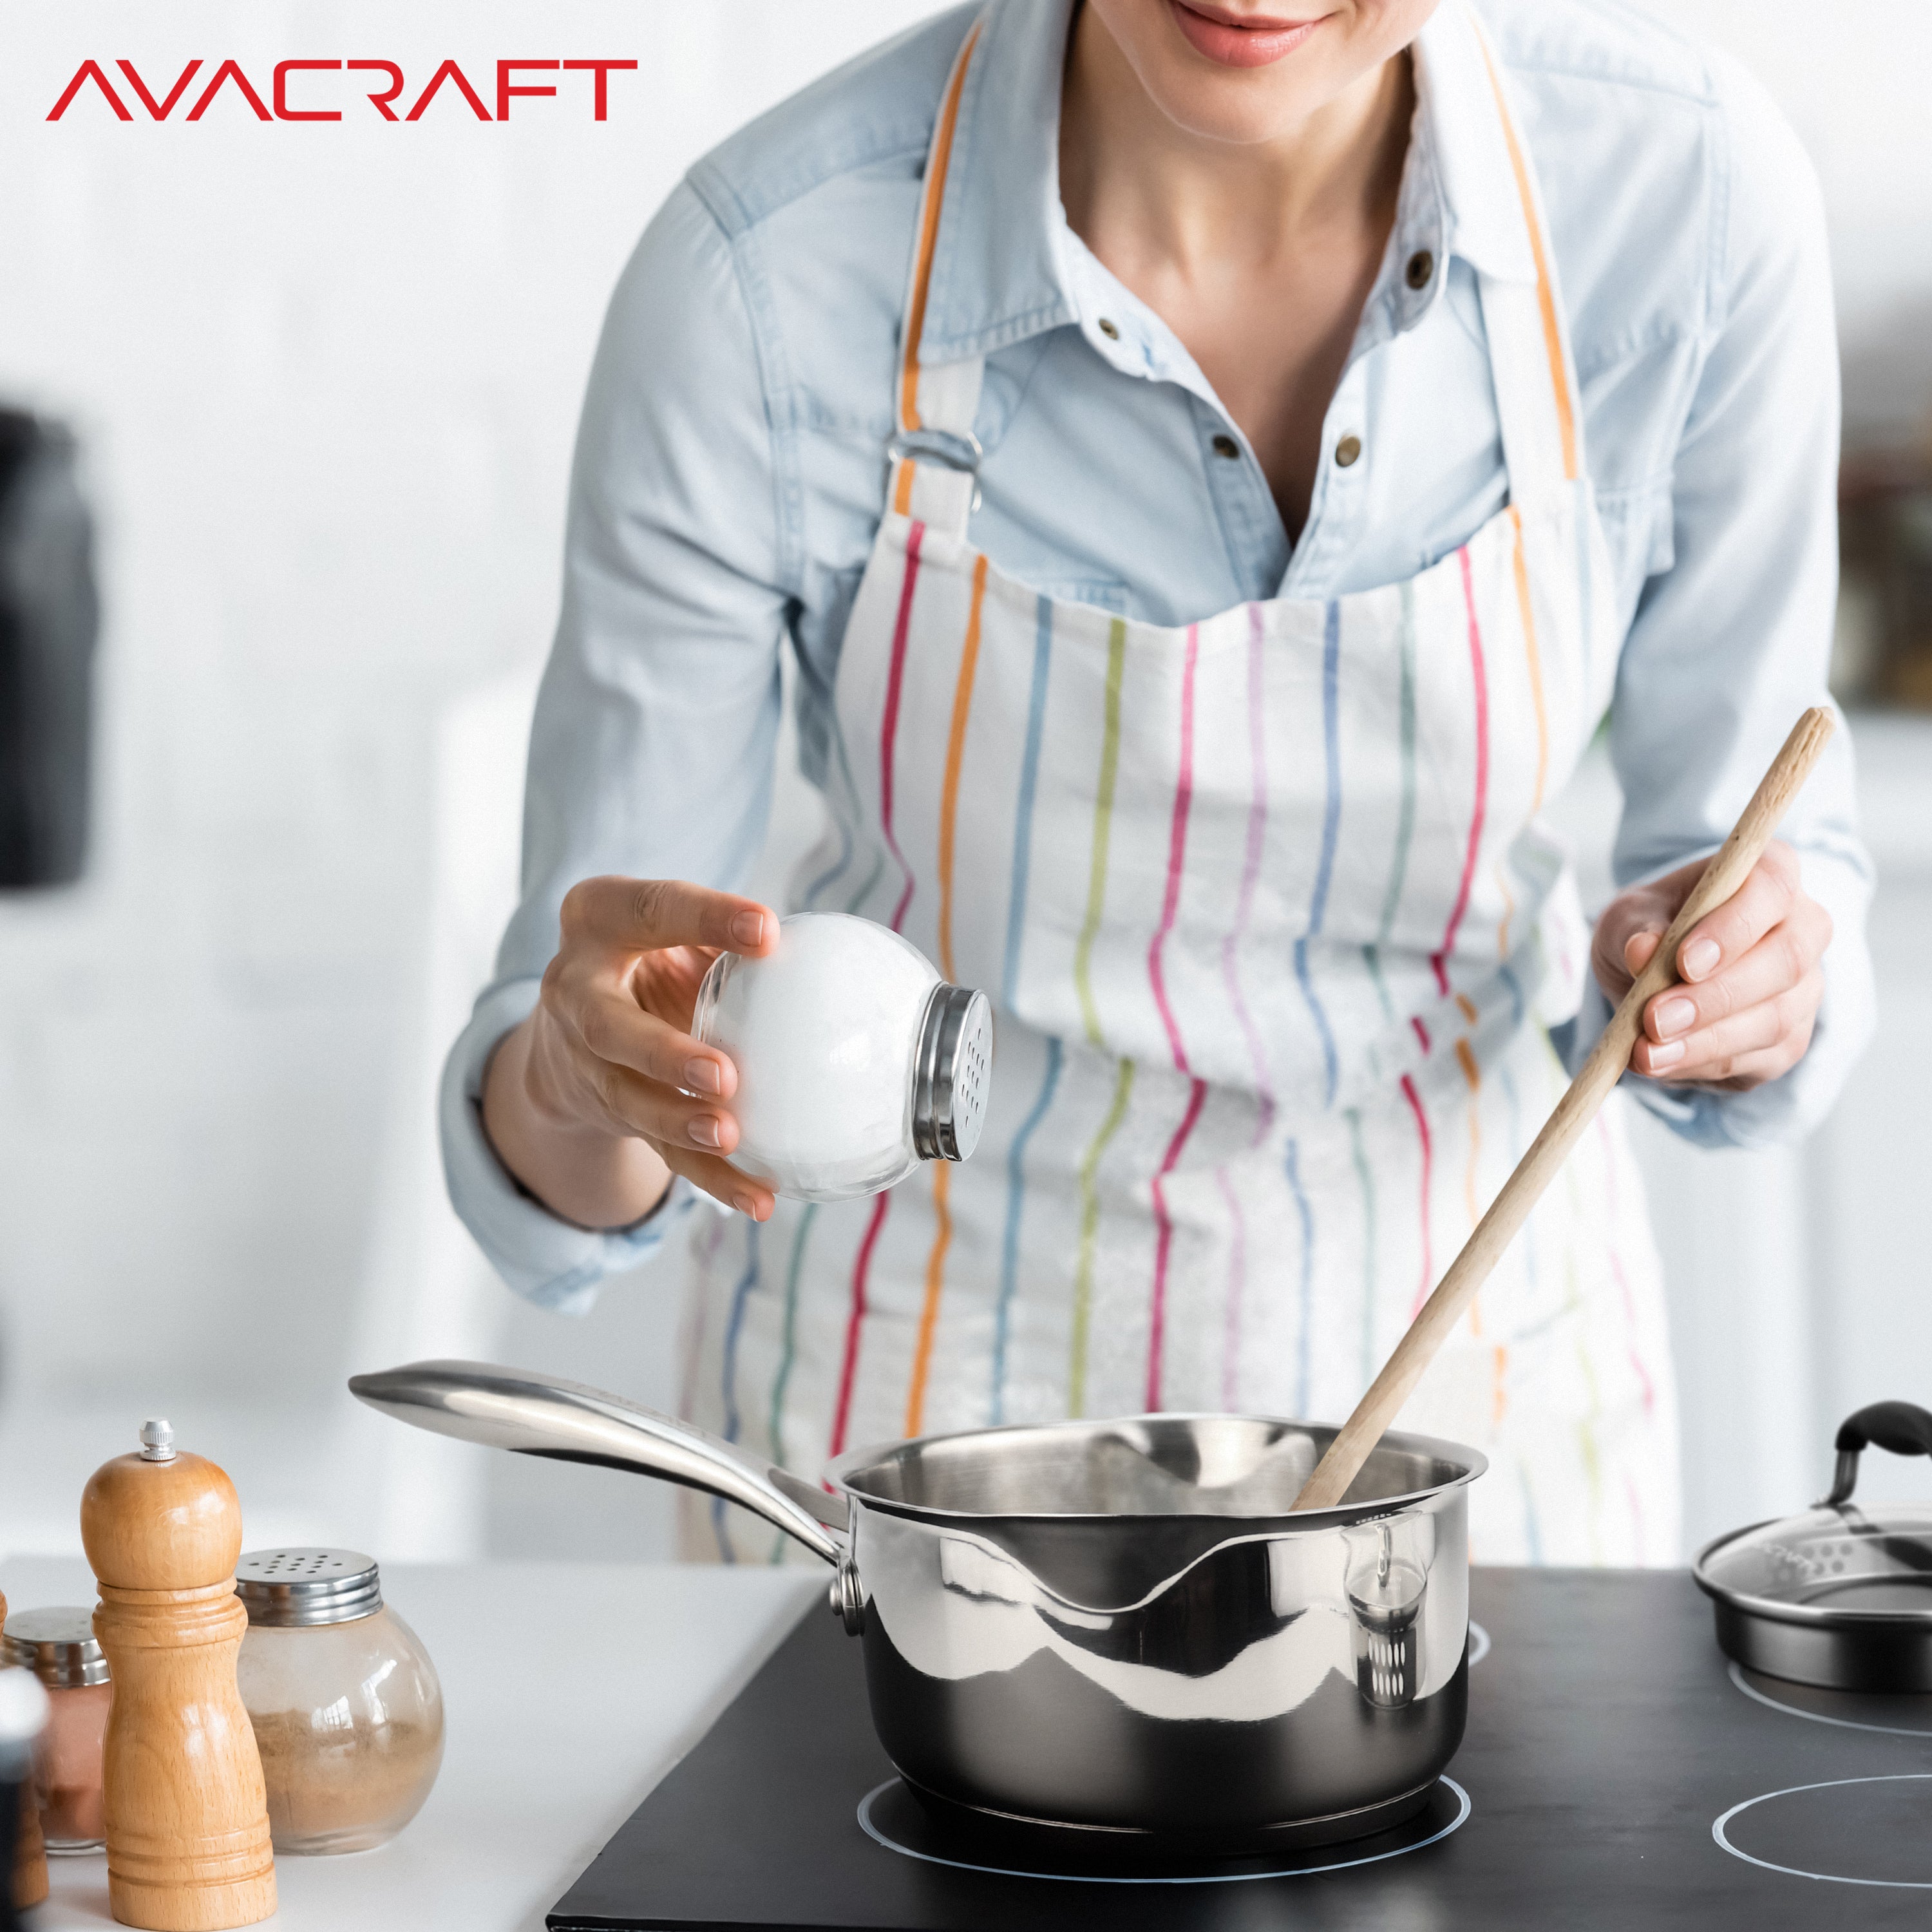 AVACRAFT Stainless Steel Saucepan with Glass Lid Strainer Lid Two Side Spouts for Easy Pour with Ergonomic Handle Multipurpose Sauce Pan with Lid